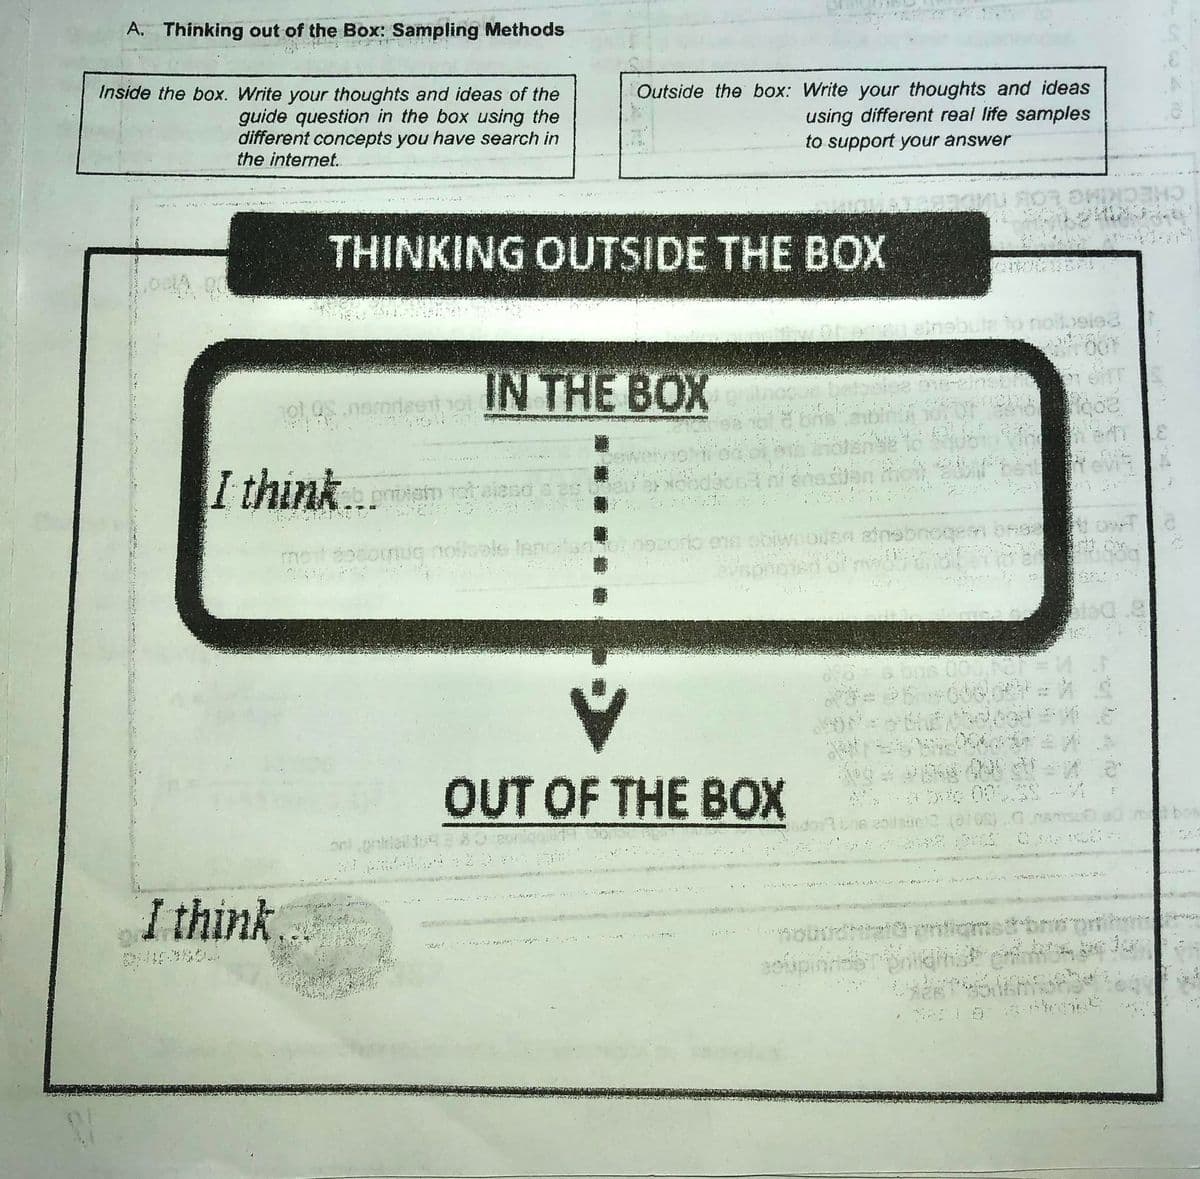 A. Thinking out of the Box: Sampling Methods
Outside the box: Write your thoughts and ideas
using different real life samples
to support your answer
Inside the box. Write your thoughts and ideas of the
guide question in the box using the
different concepts you have search in
the internet.
CHECKIMG LO
THINKING OUTSIDE THE BOX
eine
to noit eiea
IN THE BOX
tevi
I think...
reh alend s es
moteocogiuIG noloale IsGtsnonocorto ene obiwnOUBA Bne
vspheied
OUT OF THE BOX
003心
bo
I think.
soupin
